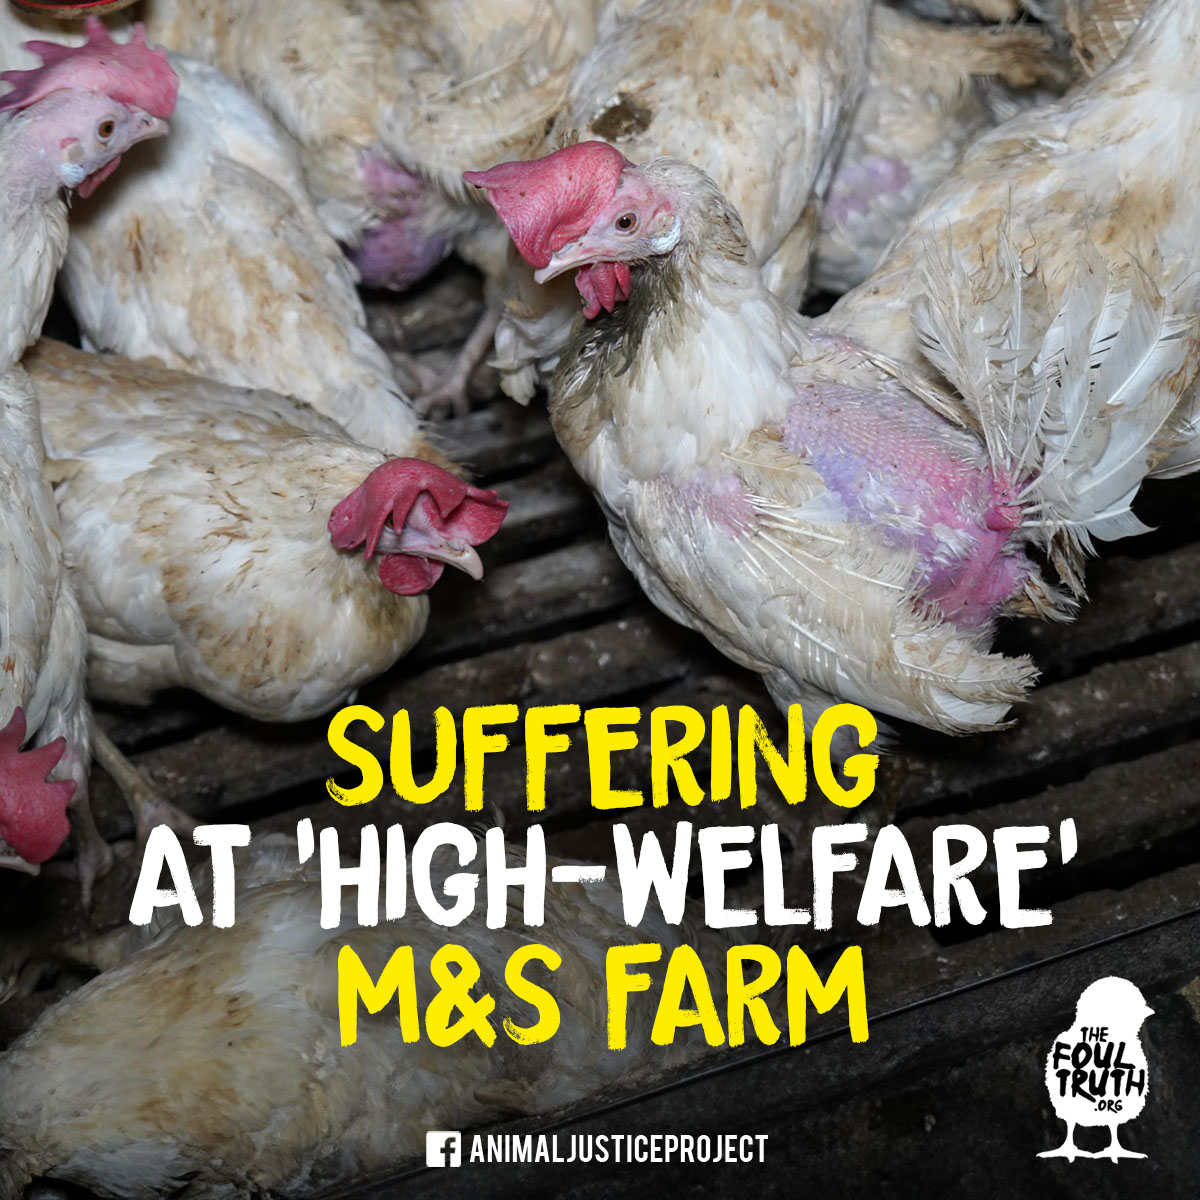 UNTOLD SUFFERING 💔 @MarksAndSpencer pride themselves on having ‘the highest standards of animal welfare’, yet we found immeasurable suffering inside Home Farm in Lincolnshire, which was contracted by M&S and @RSPCAAssured at the time of filming. #CageFreeIsntCrueltyFree